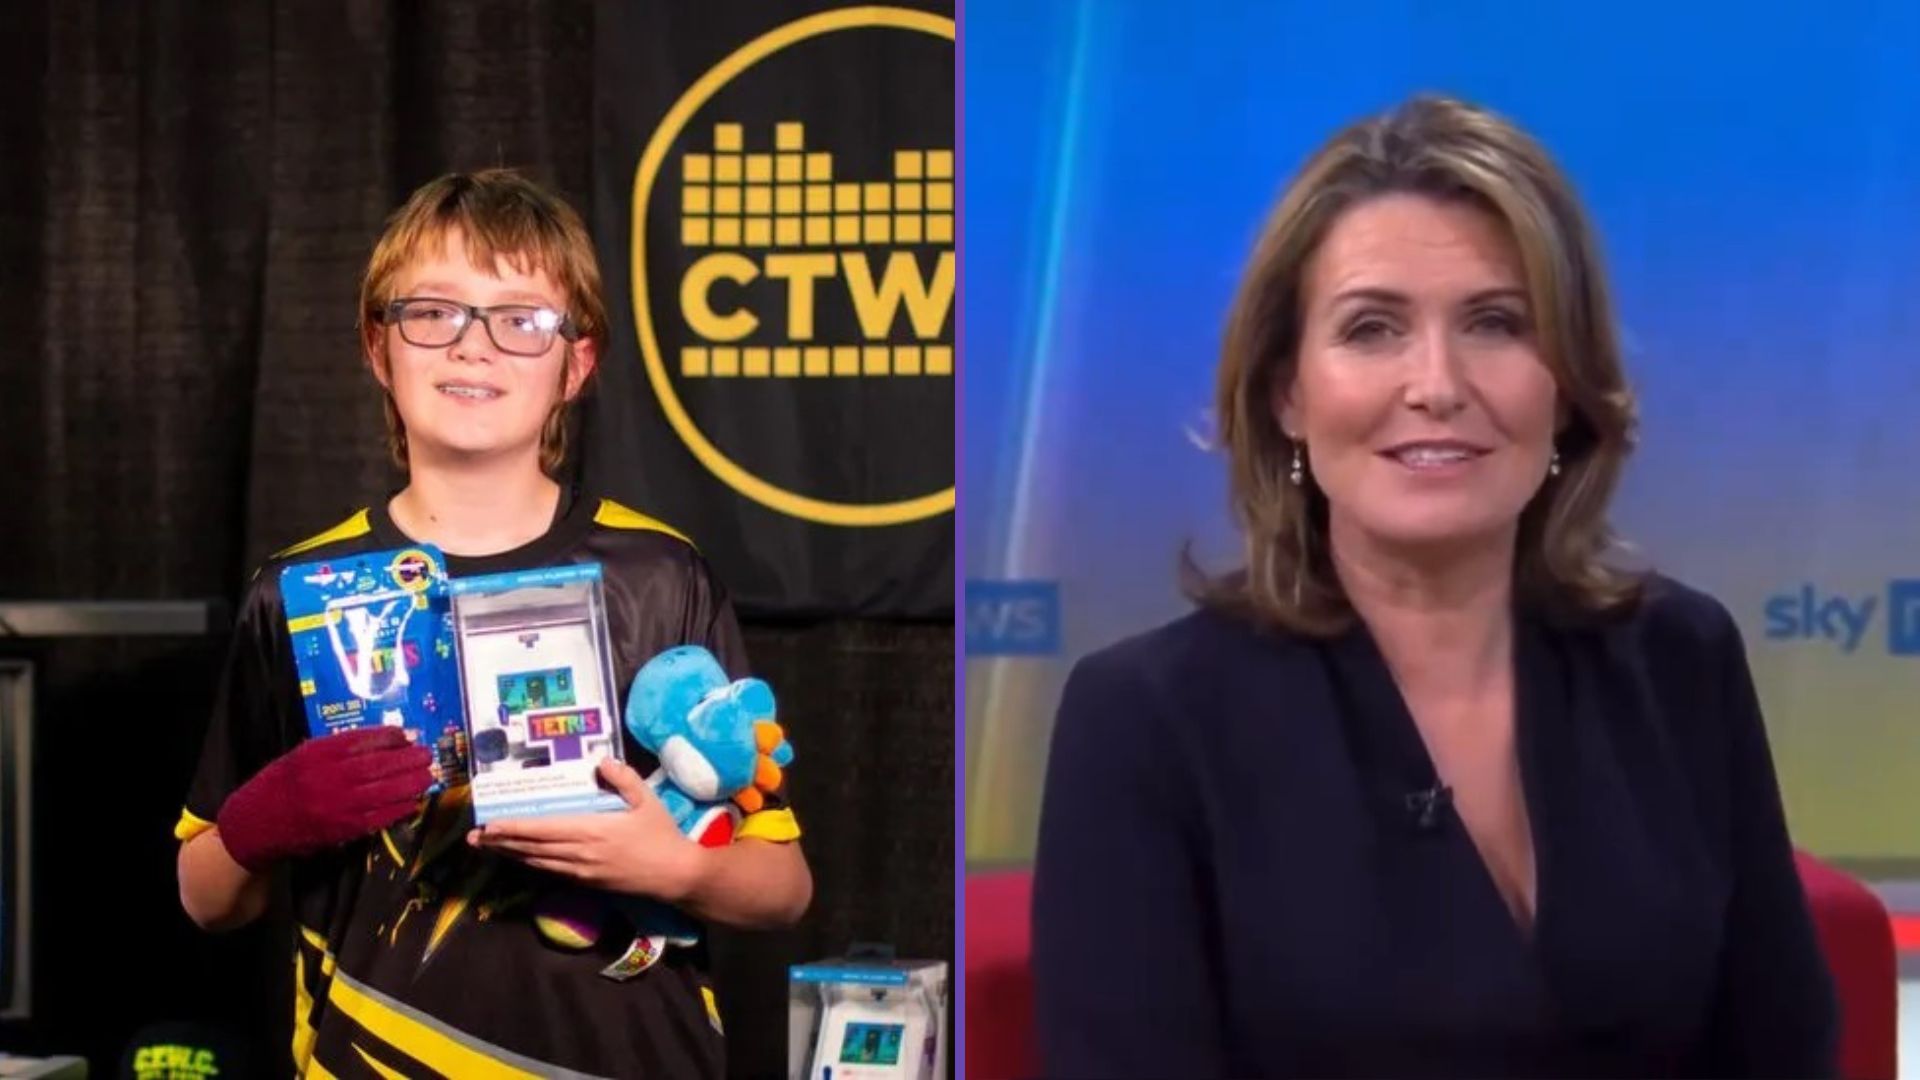 Sky News Reporter’s “Tetris Is Not A Life Goal” Comment To 13-Year-Old Champ Causes Uproar